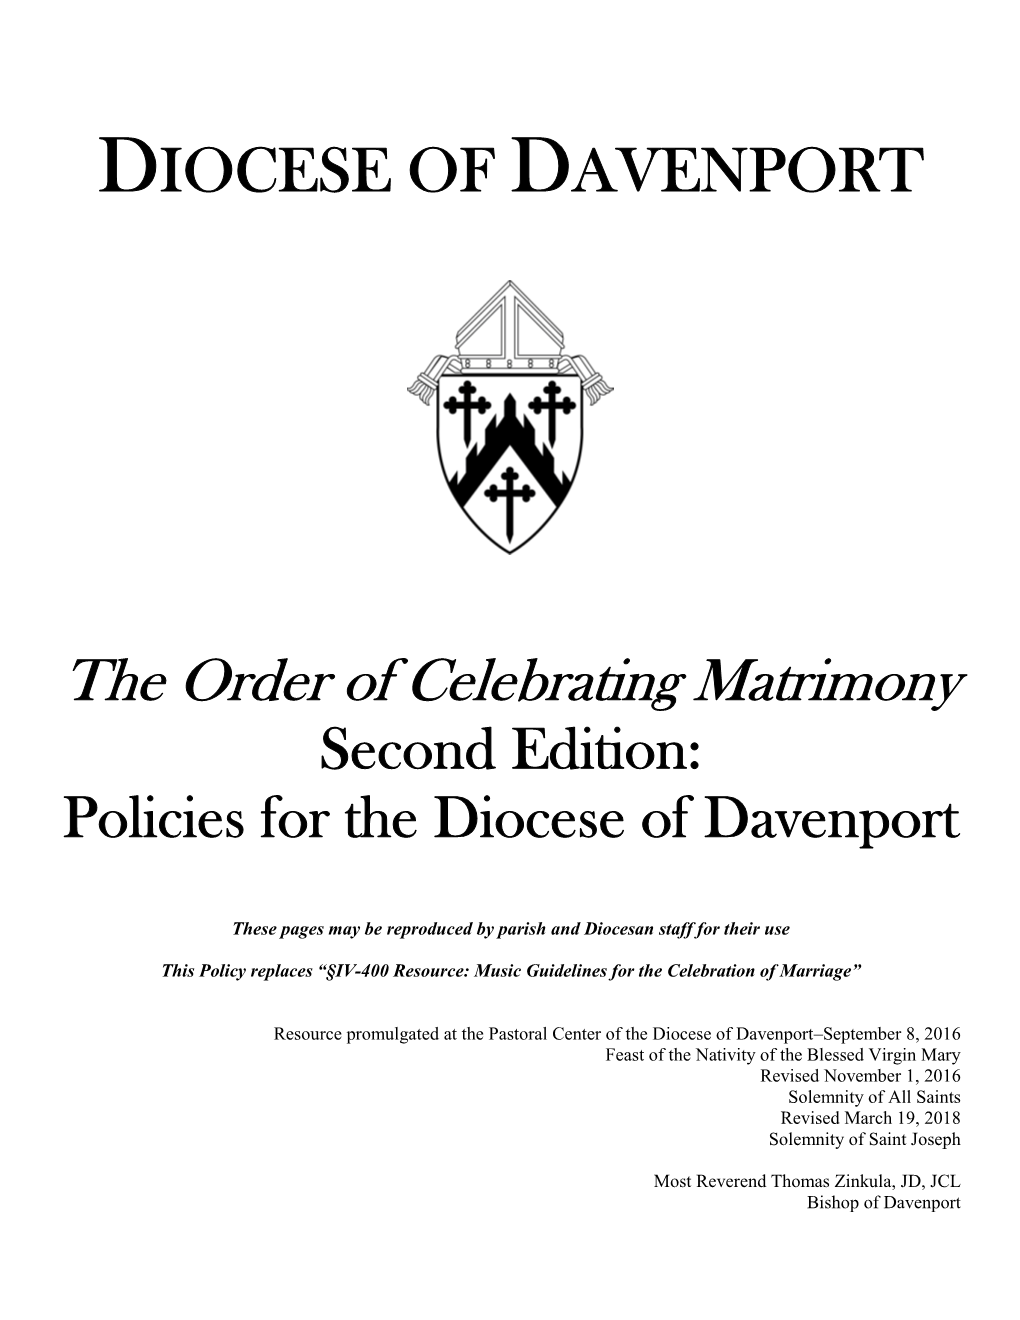 Policies for the Diocese of Davenport